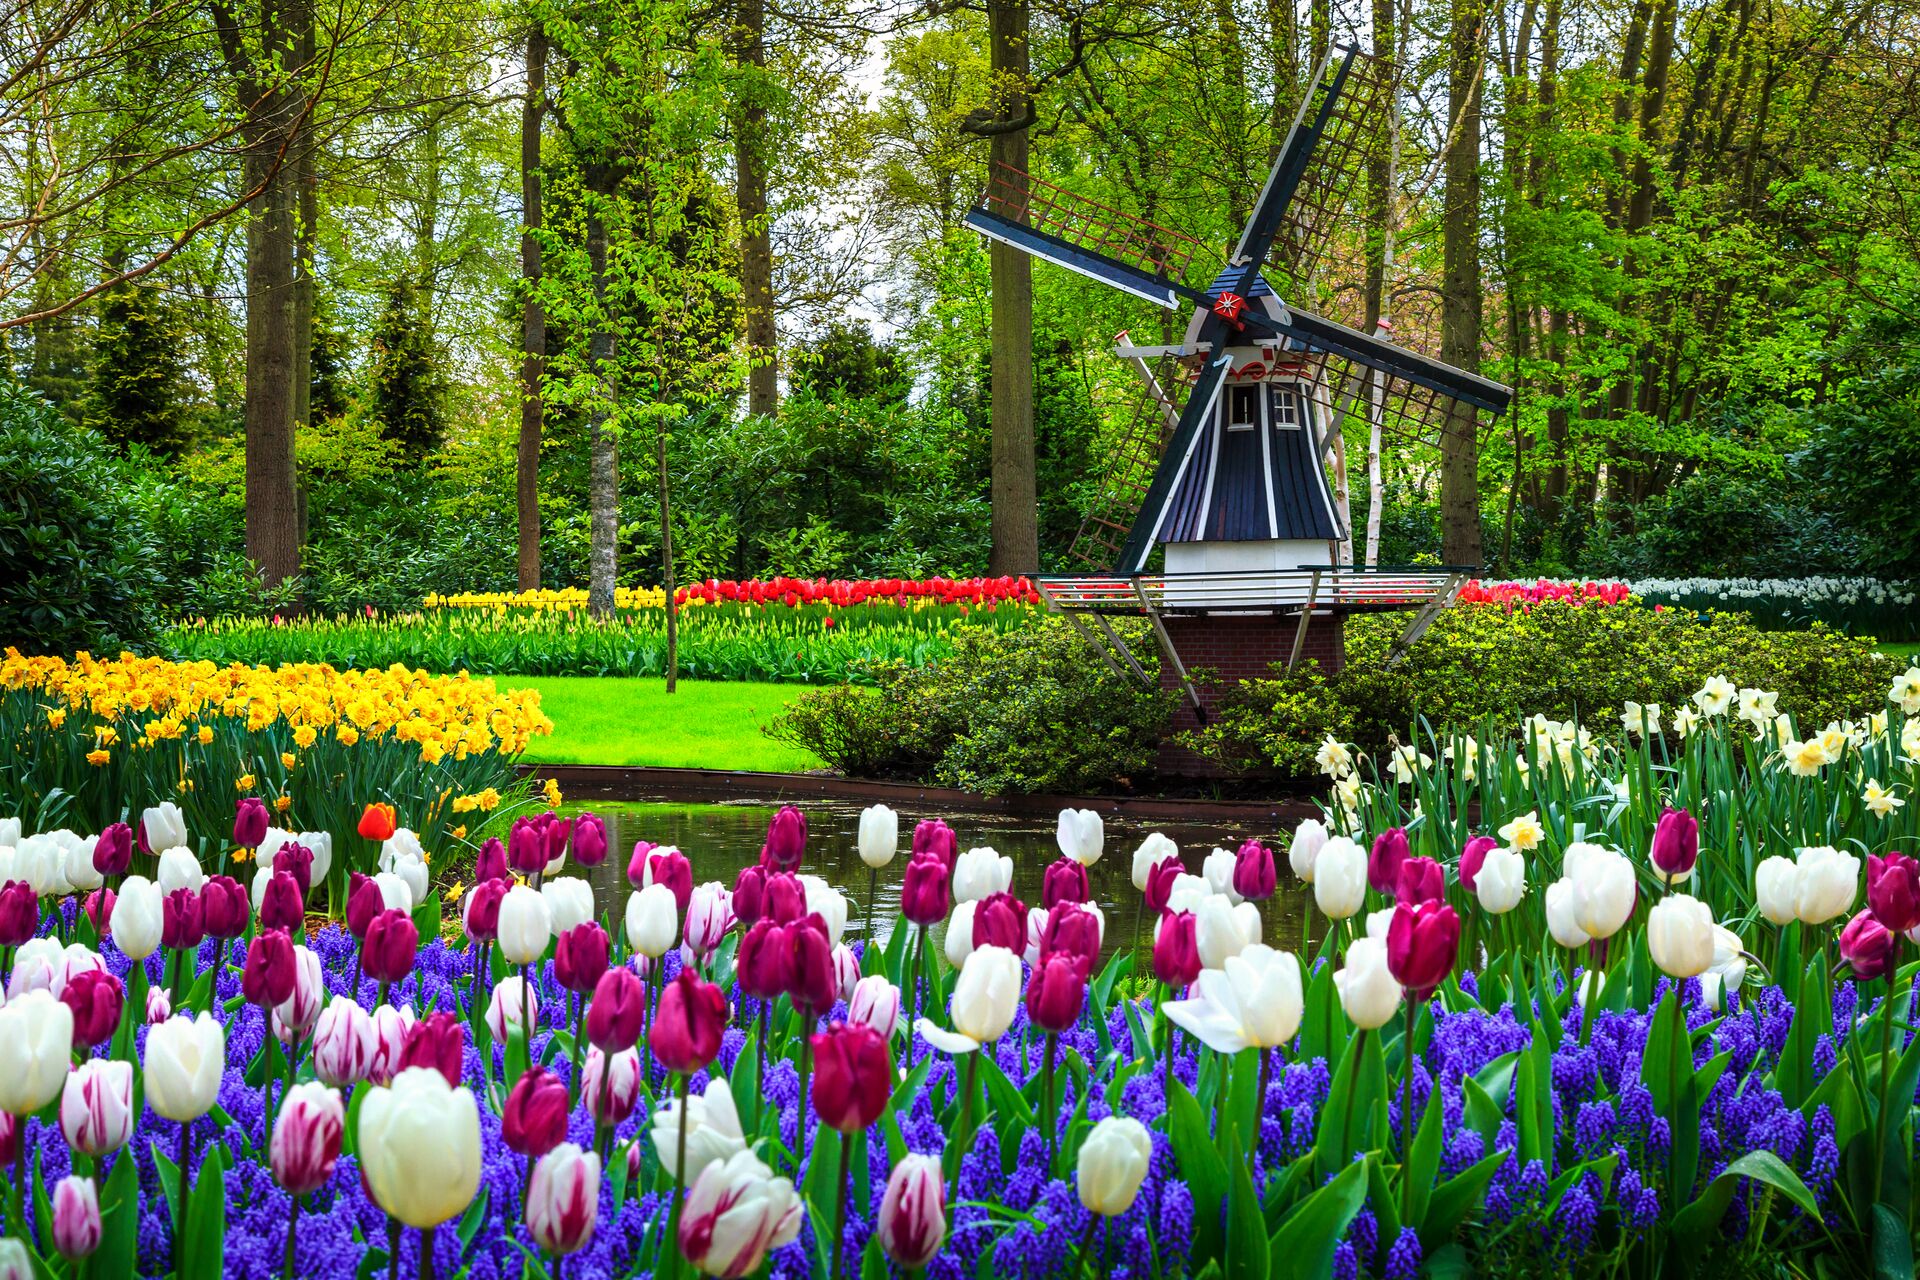 Purple, white, pink and red tulips bloom in front of a windmill and lush green gardens.